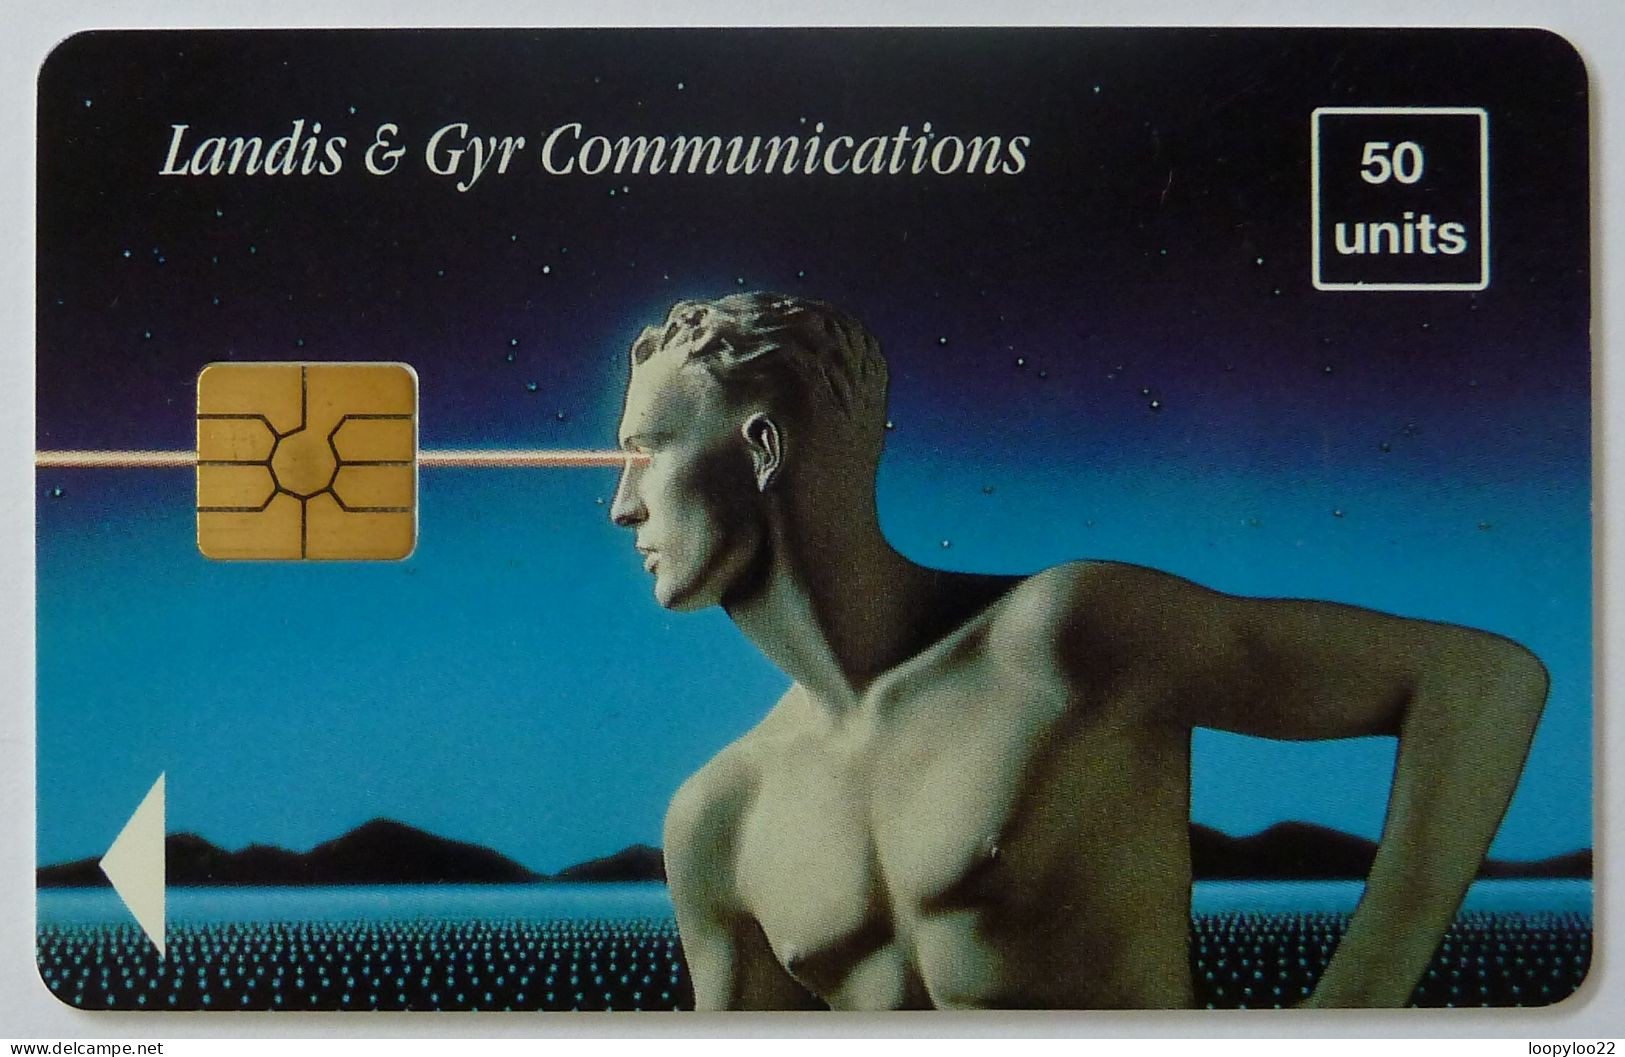 SOUTH AFRICA - Landis & Gyr Communications - 50 Units - Tender Card - Phoenix - South Africa